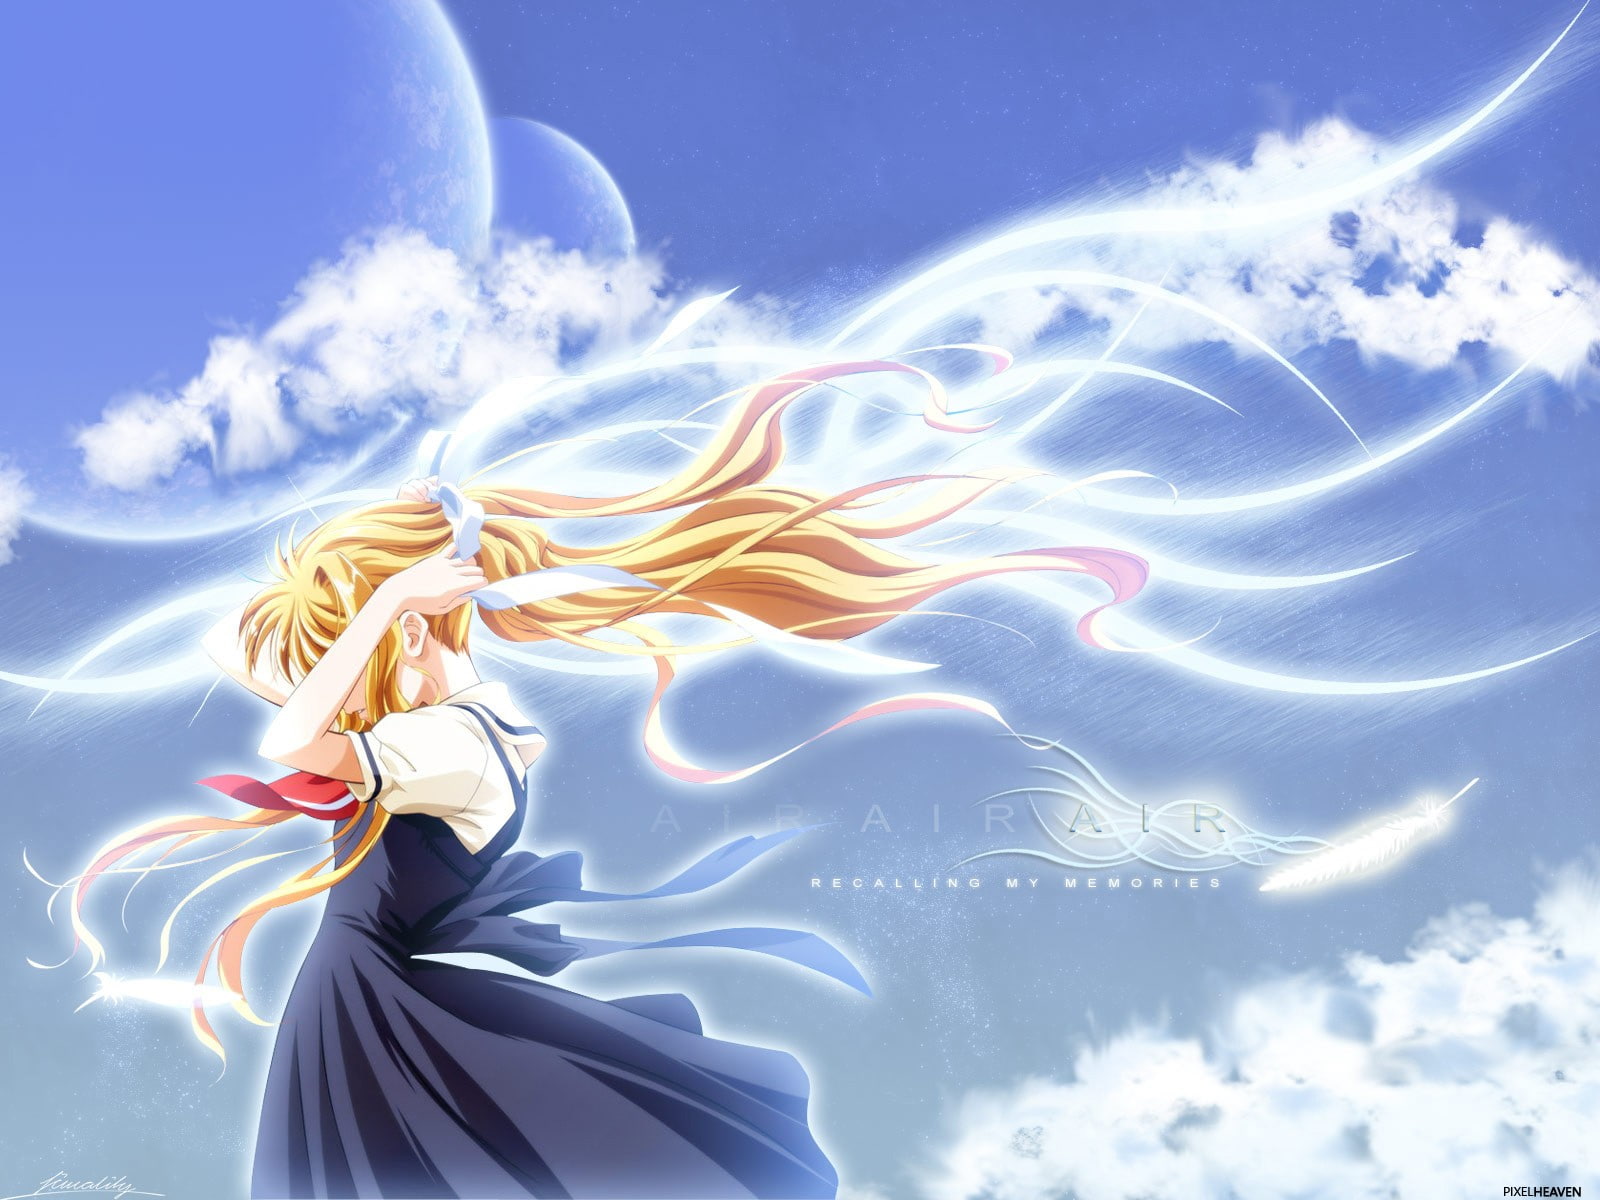 Air (anime), anime girls, one person, sky, blue, nature, motion